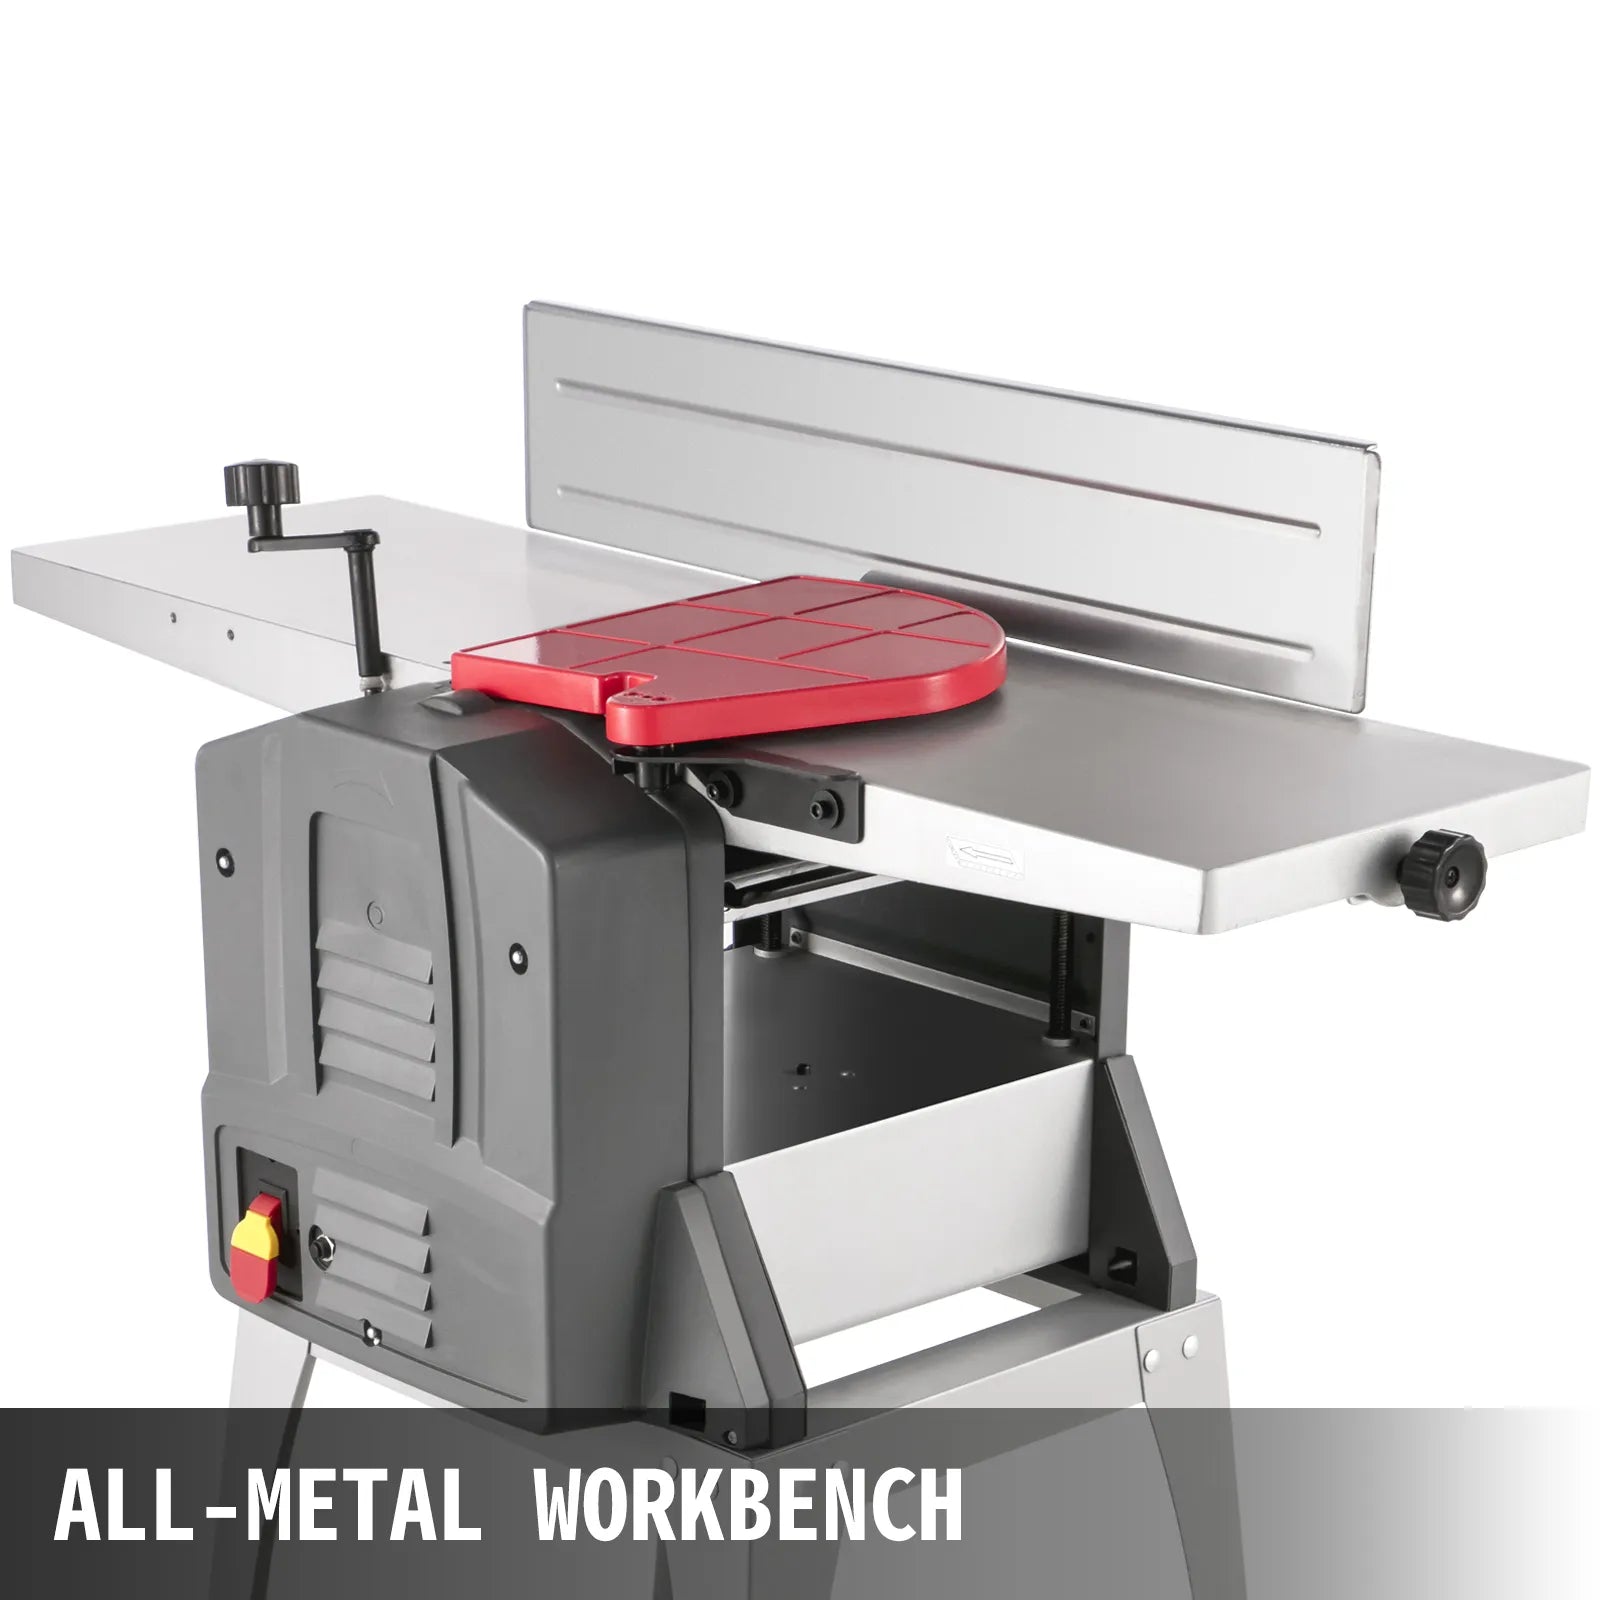 VEVOR 8 Inch Tabletop Jointer Woodworking Benchtop with Heavy Duty Stand - 1500W, 8" Cutting Width, 120mm Cutting Thickness - Farefe